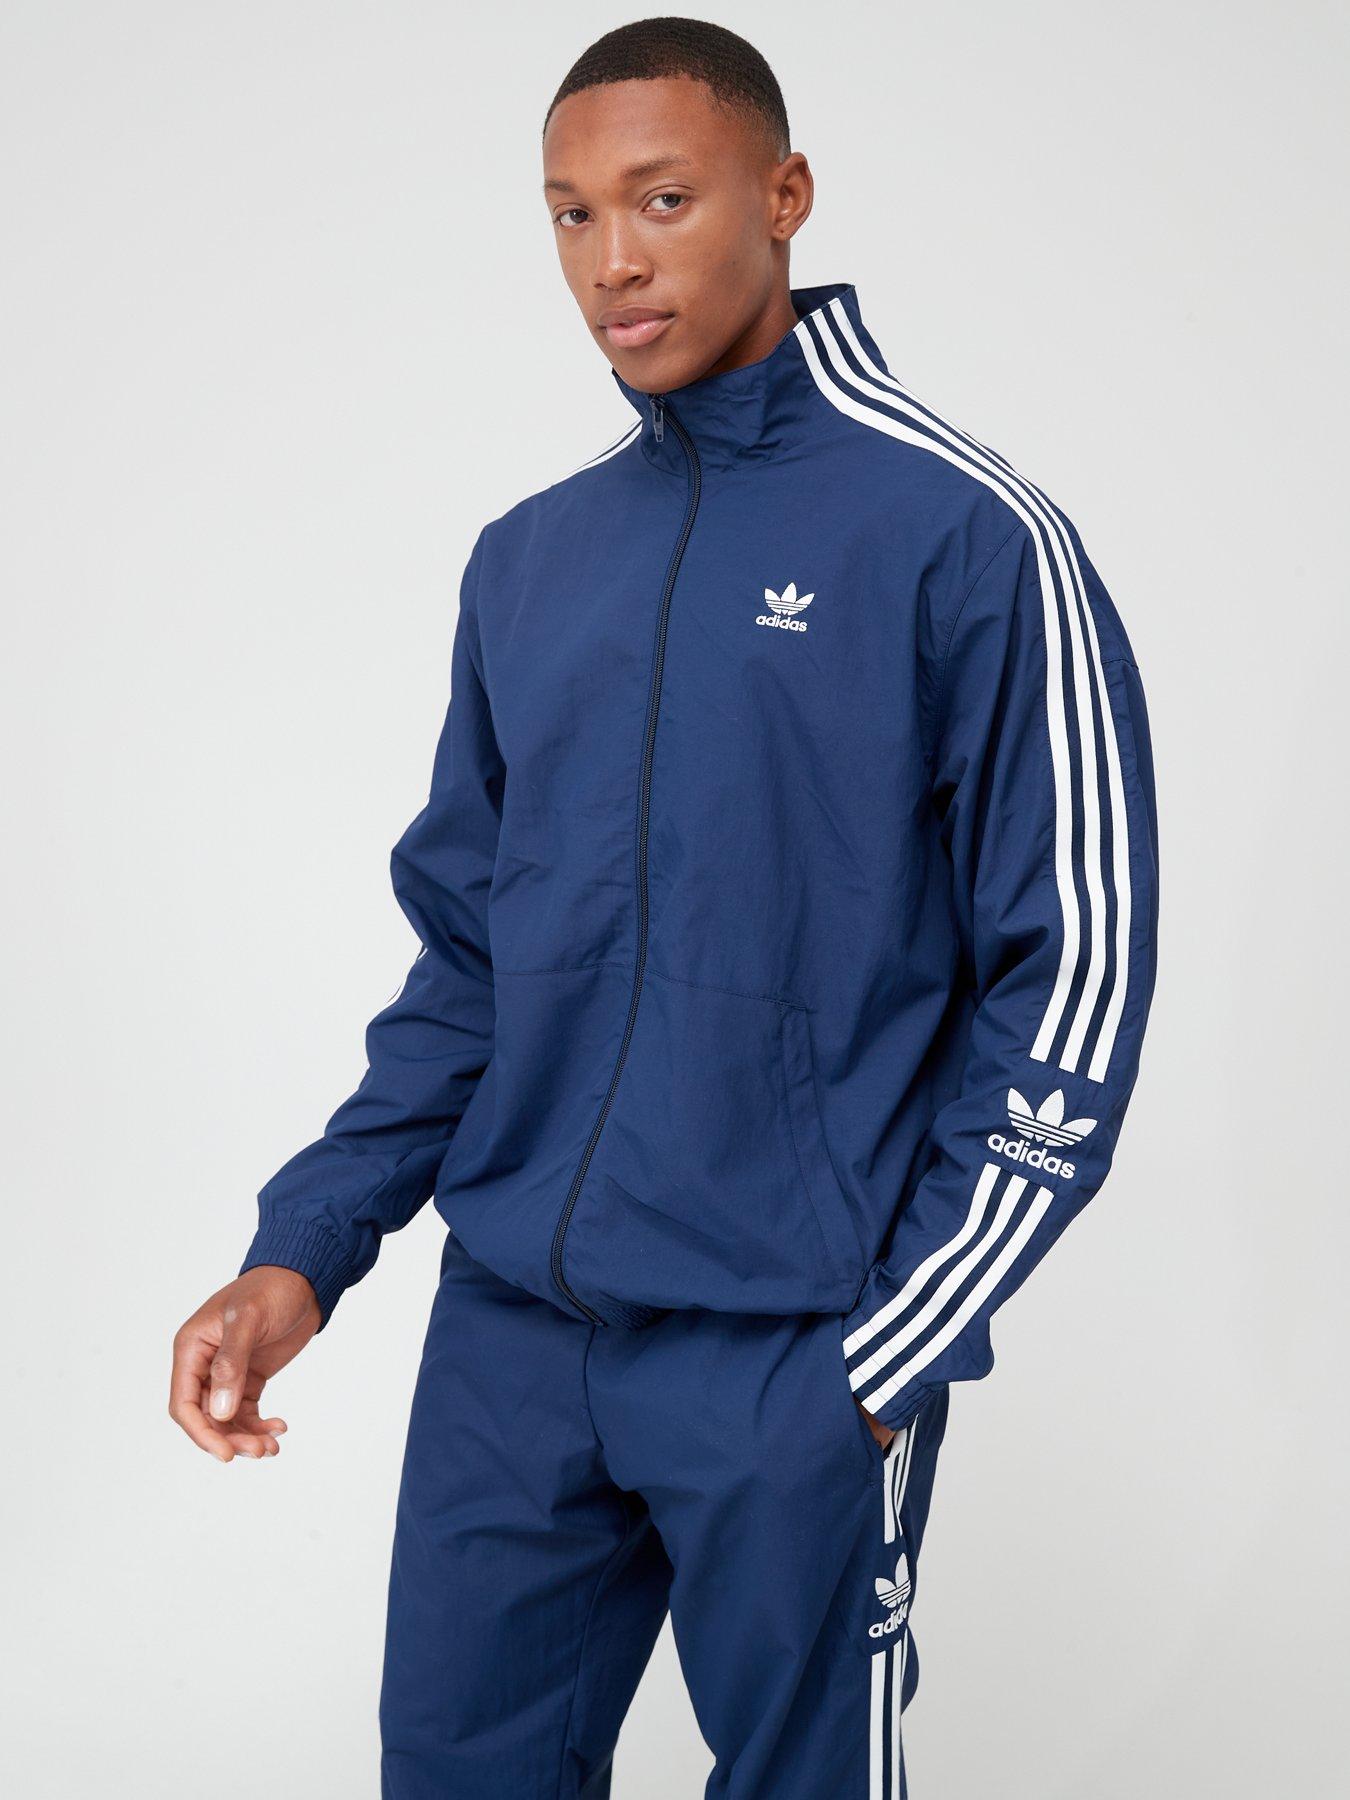 Blue | Latest_Offers | S Adidas originals | Tracksuits | Mens clothing Sports & leisure | www.littlewoods.com